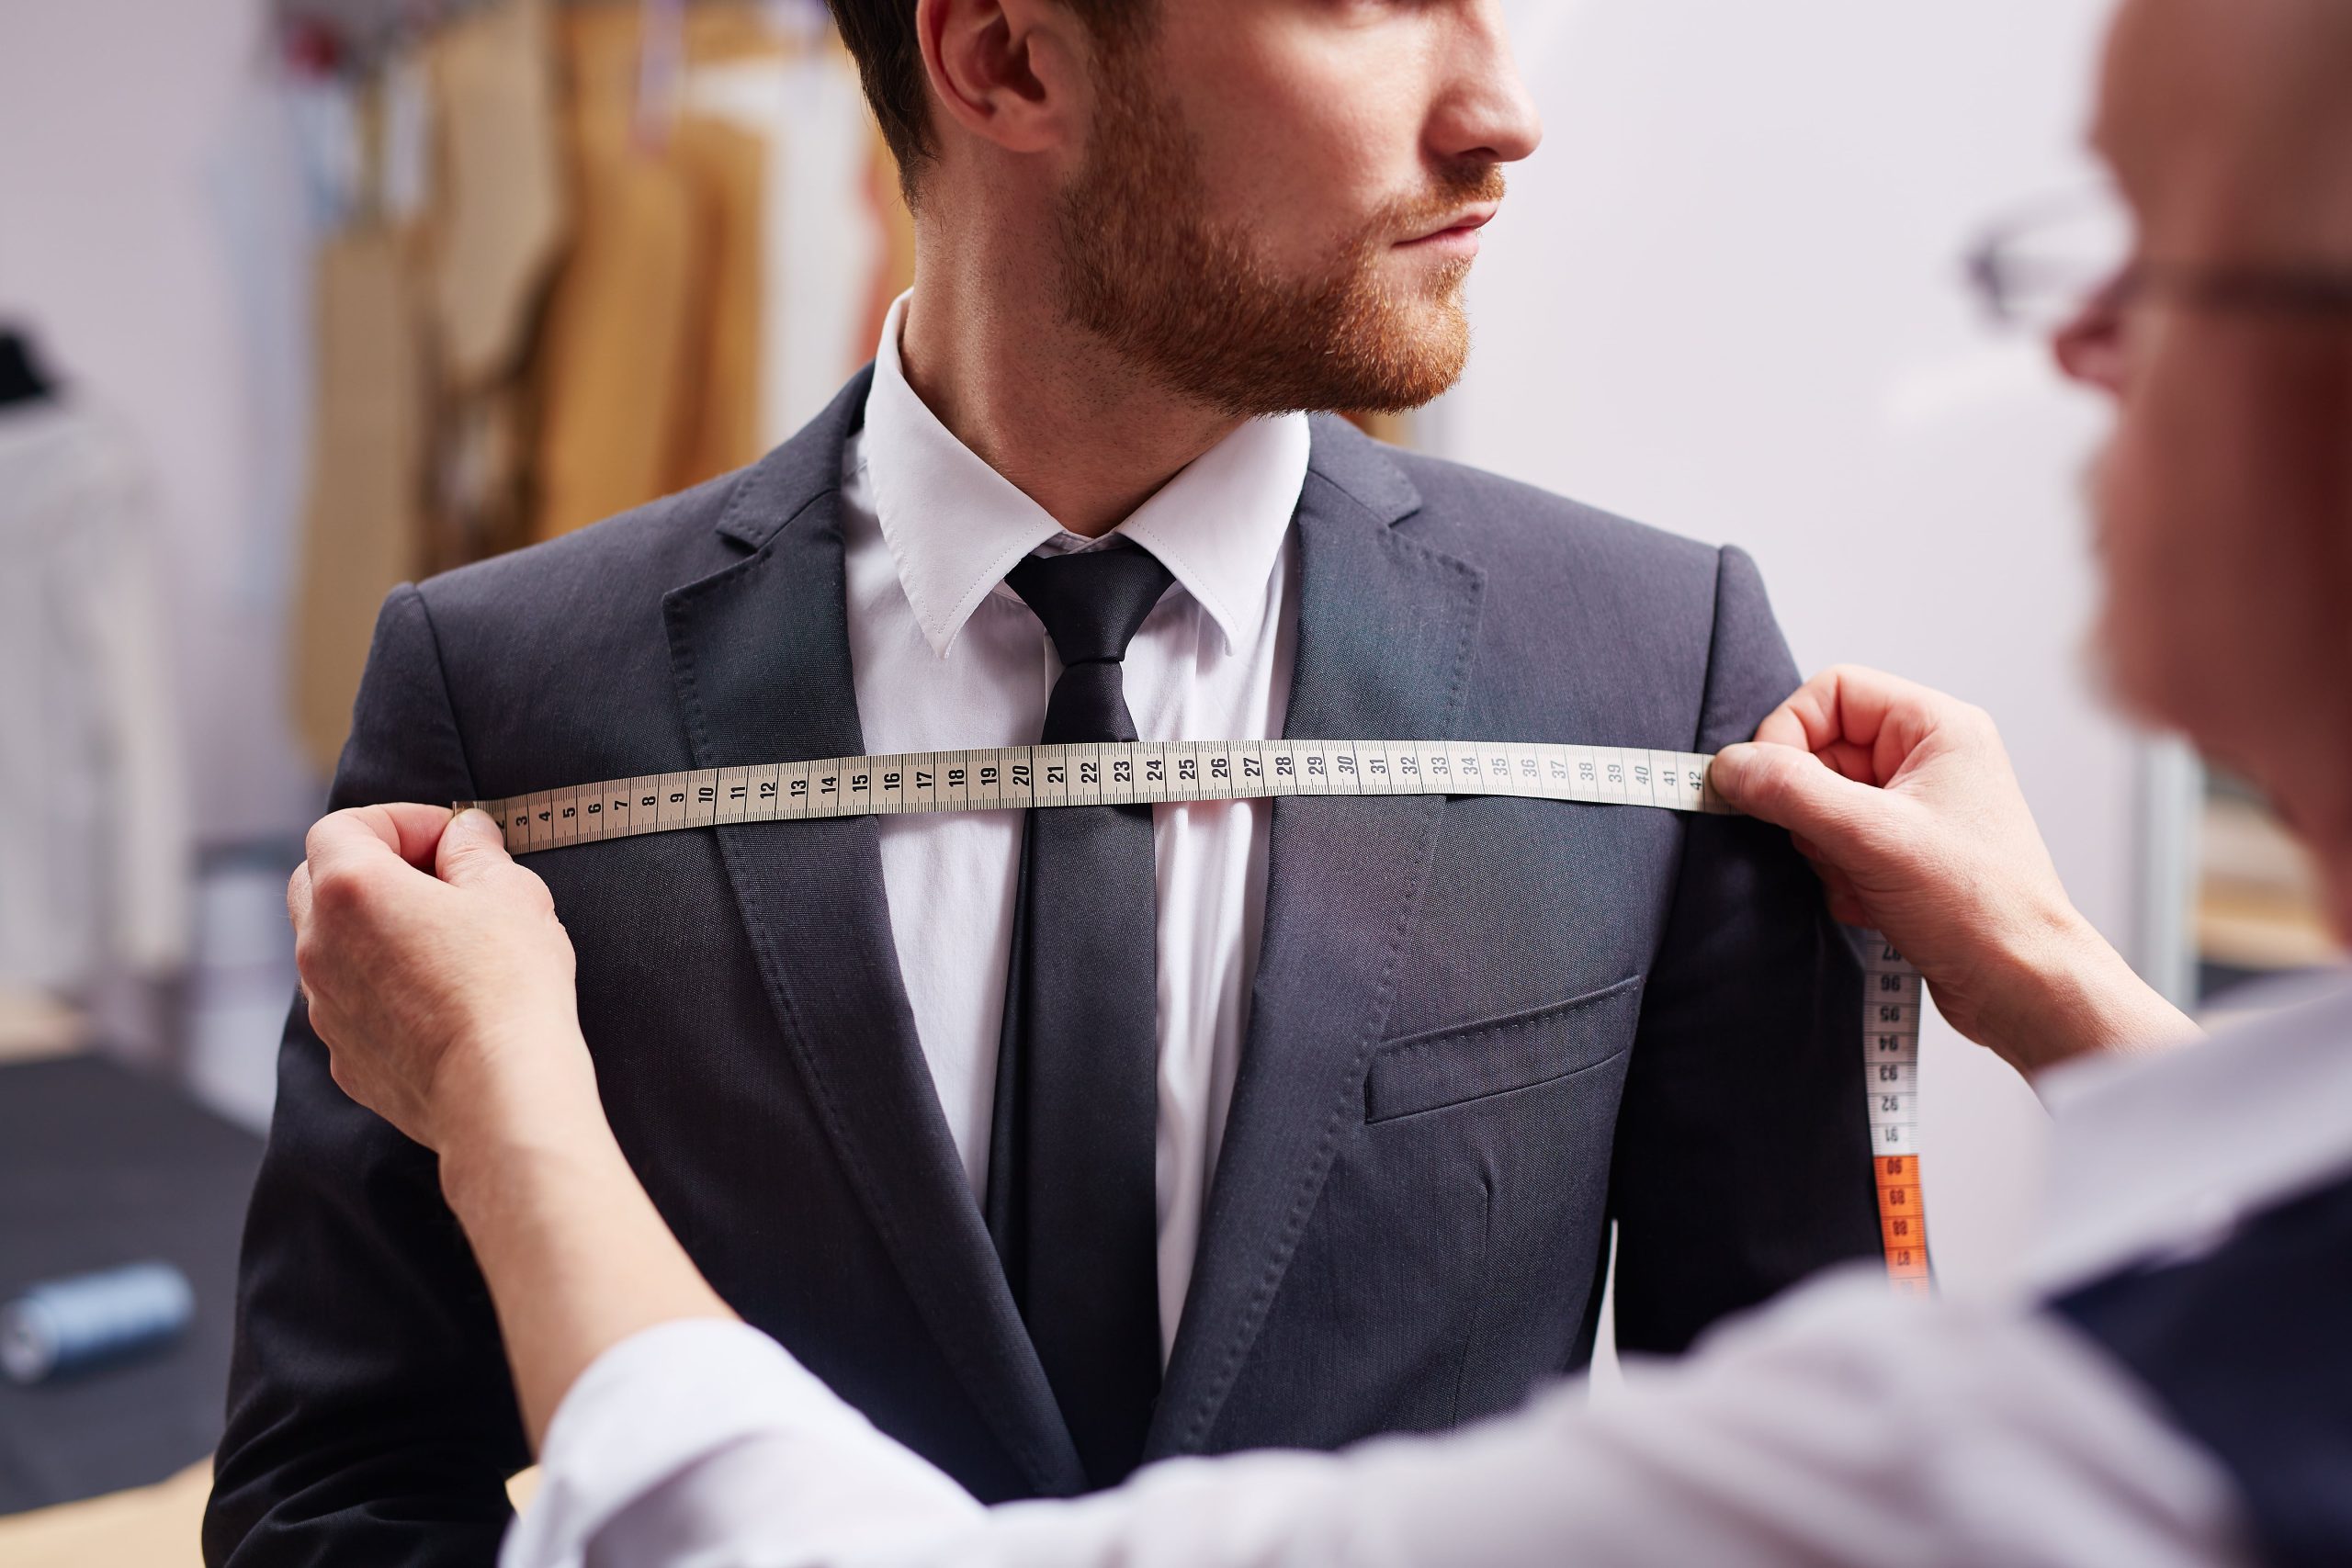 “Personalized Perfection: The Rise of Tailor-Made Couture”